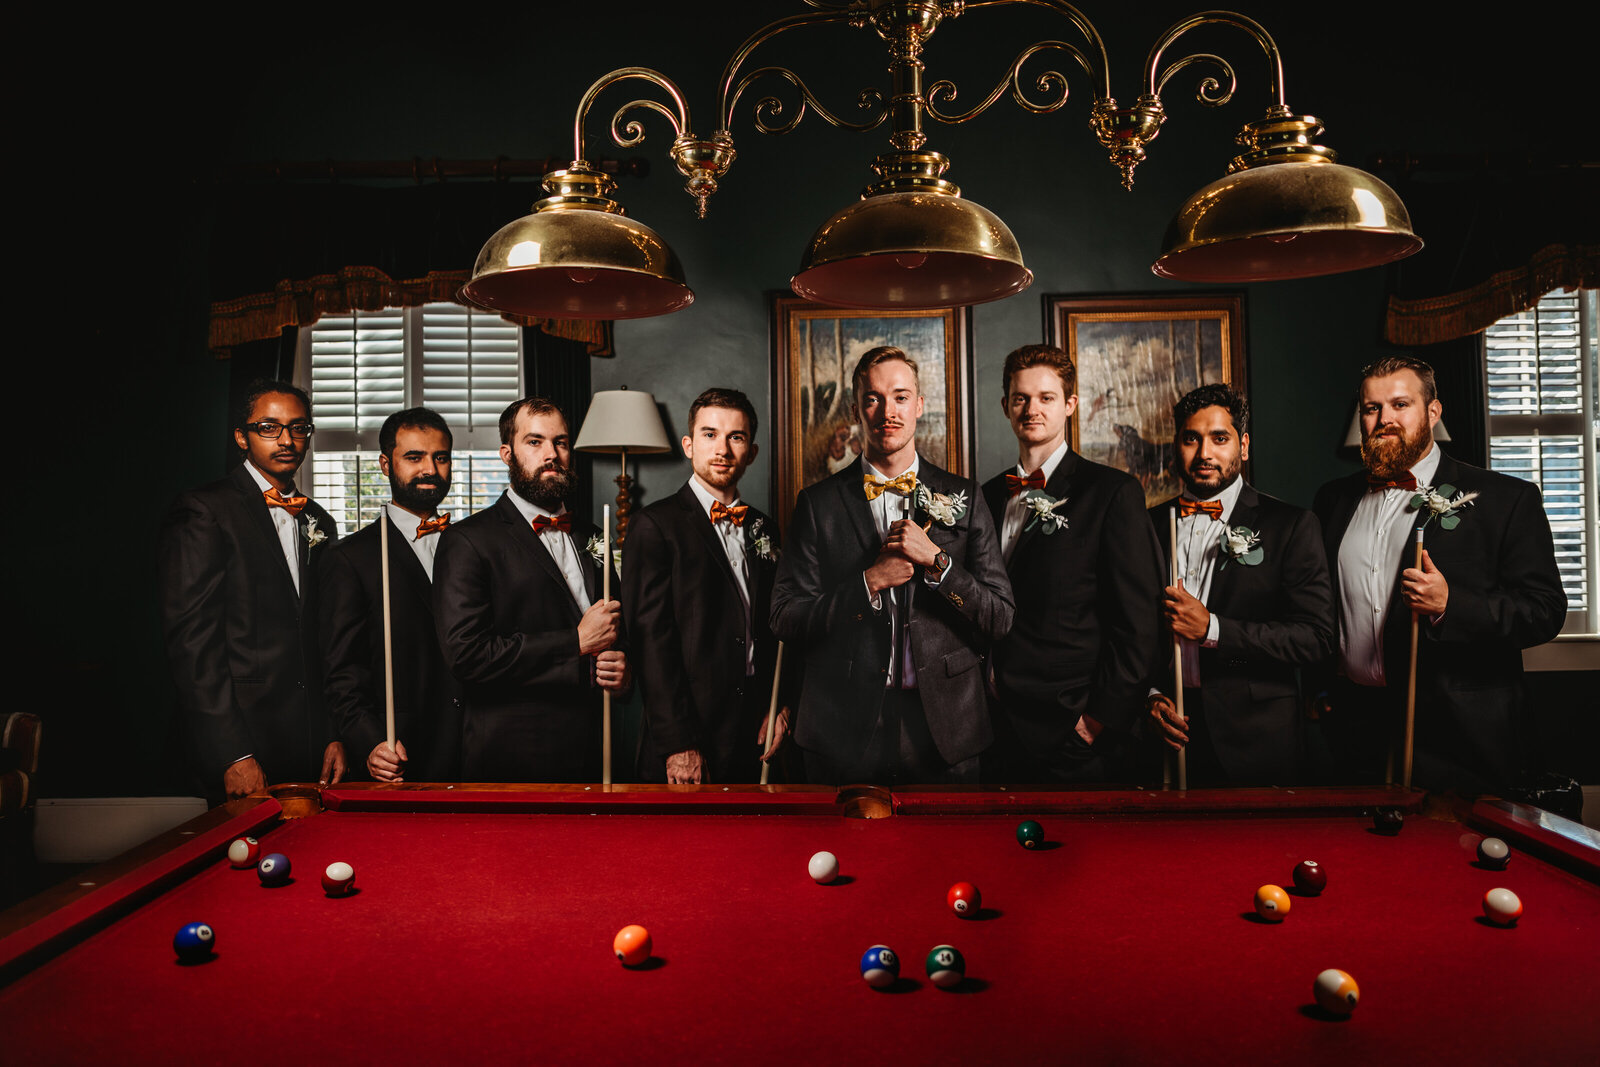 Baltimore photographers captures groomsmen photo with groom and his groomsmen standing around a pool table in a lodge